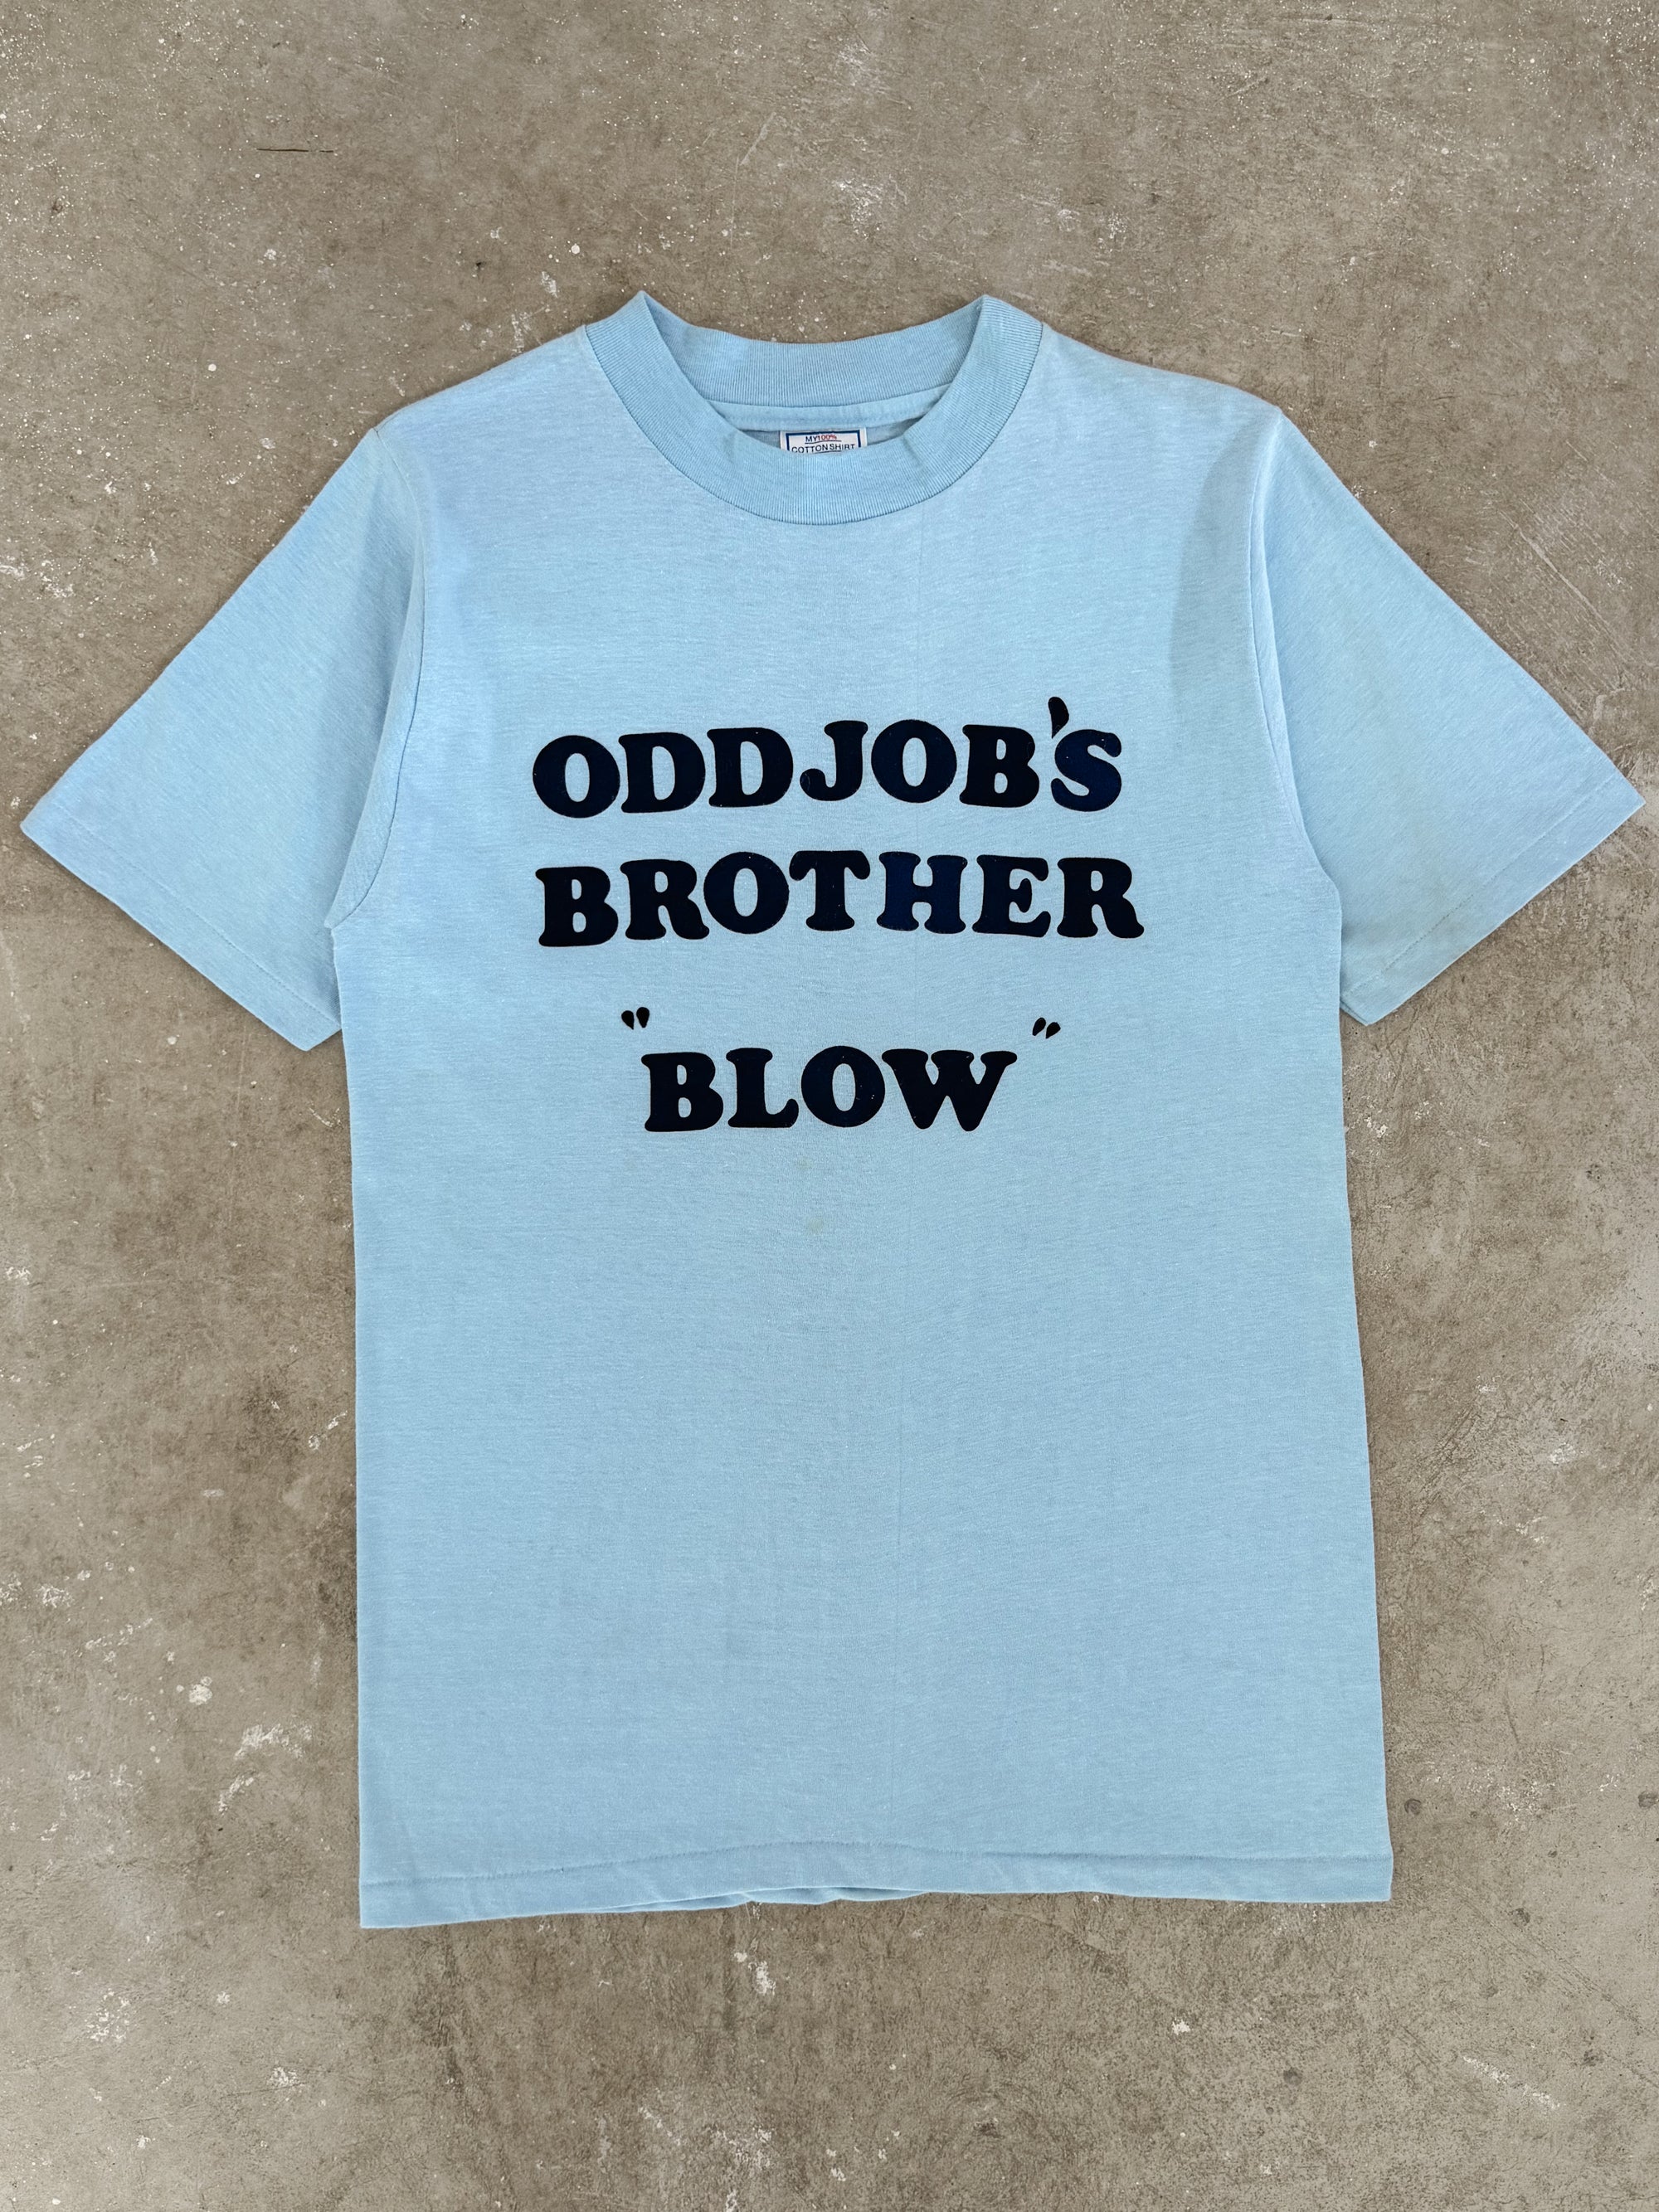 1980s "Oddjob's Brother" Felt Letter Tee (S/M)